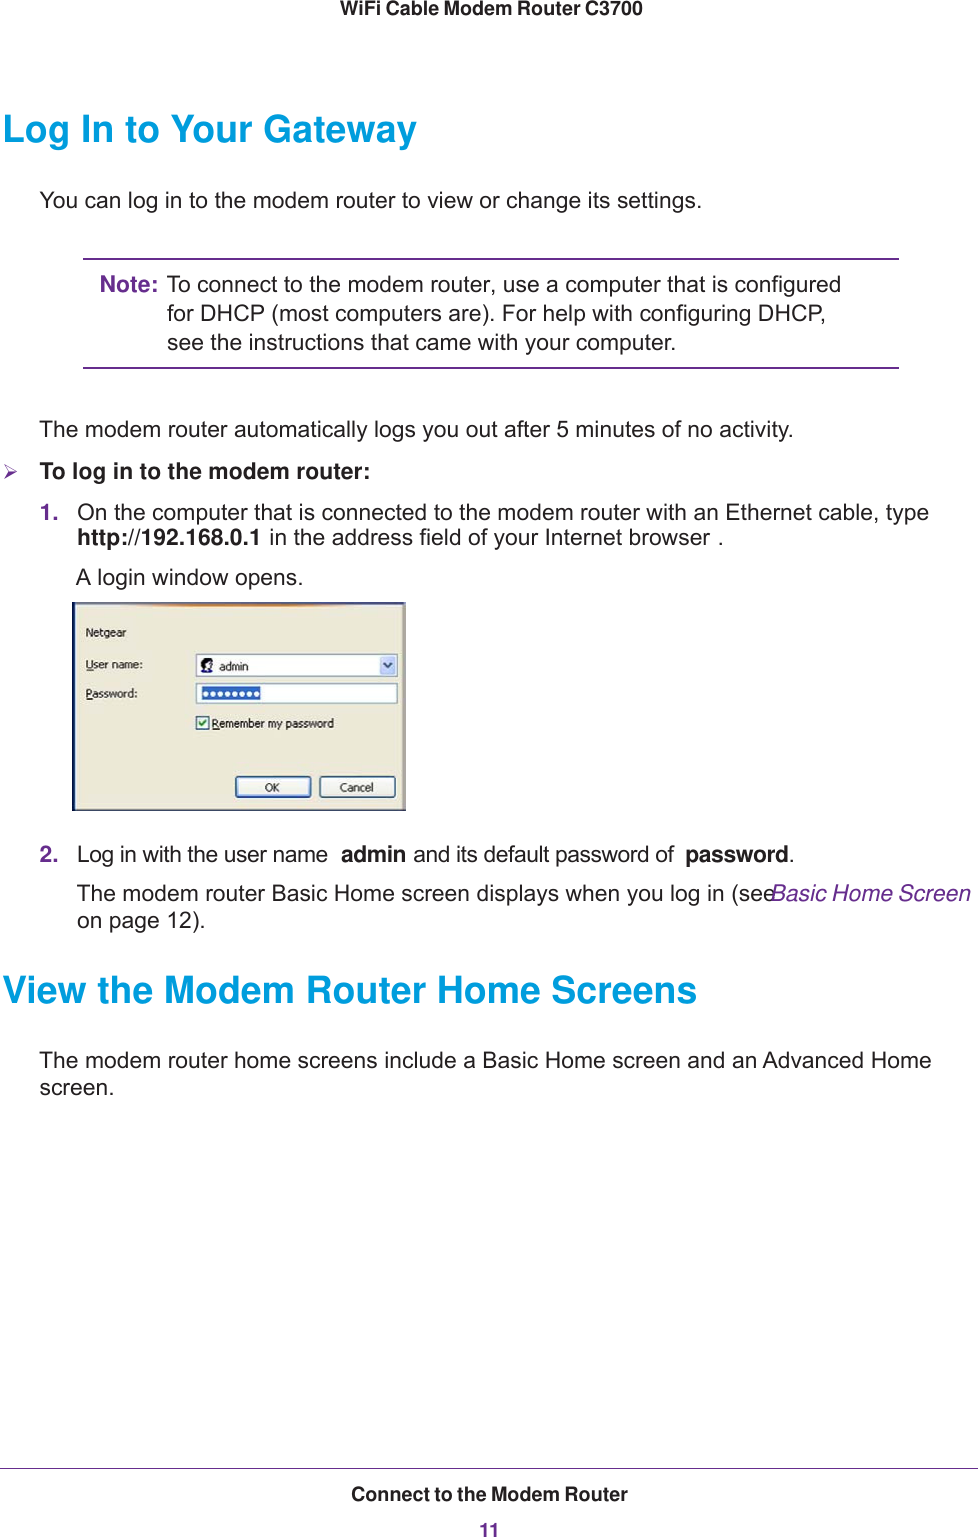 Connect to the Modem Router11 WiFi Cable Modem Router C3700Log In to Your GatewayYou can log in to the modem router to view or change its settings.Note: To connect to the modem router, use a computer that is configured for DHCP (most computers are). For help with configuring DHCP, see the instructions that came with your computer.The modem router automatically logs you out after 5 minutes of no activity.To log in to the modem router:1. On the computer that is connected to the modem router with an Ethernet cable, type http://192.168.0.1 in the address field of your Internet browser . A login window opens. 2. Log in with the user name  admin and its default password of  password.The modem router Basic Home screen displays when you log in (see Basic Home Screen on page  12).View the Modem Router Home ScreensThe modem router home screens include a Basic Home screen and an Advanced Home screen.